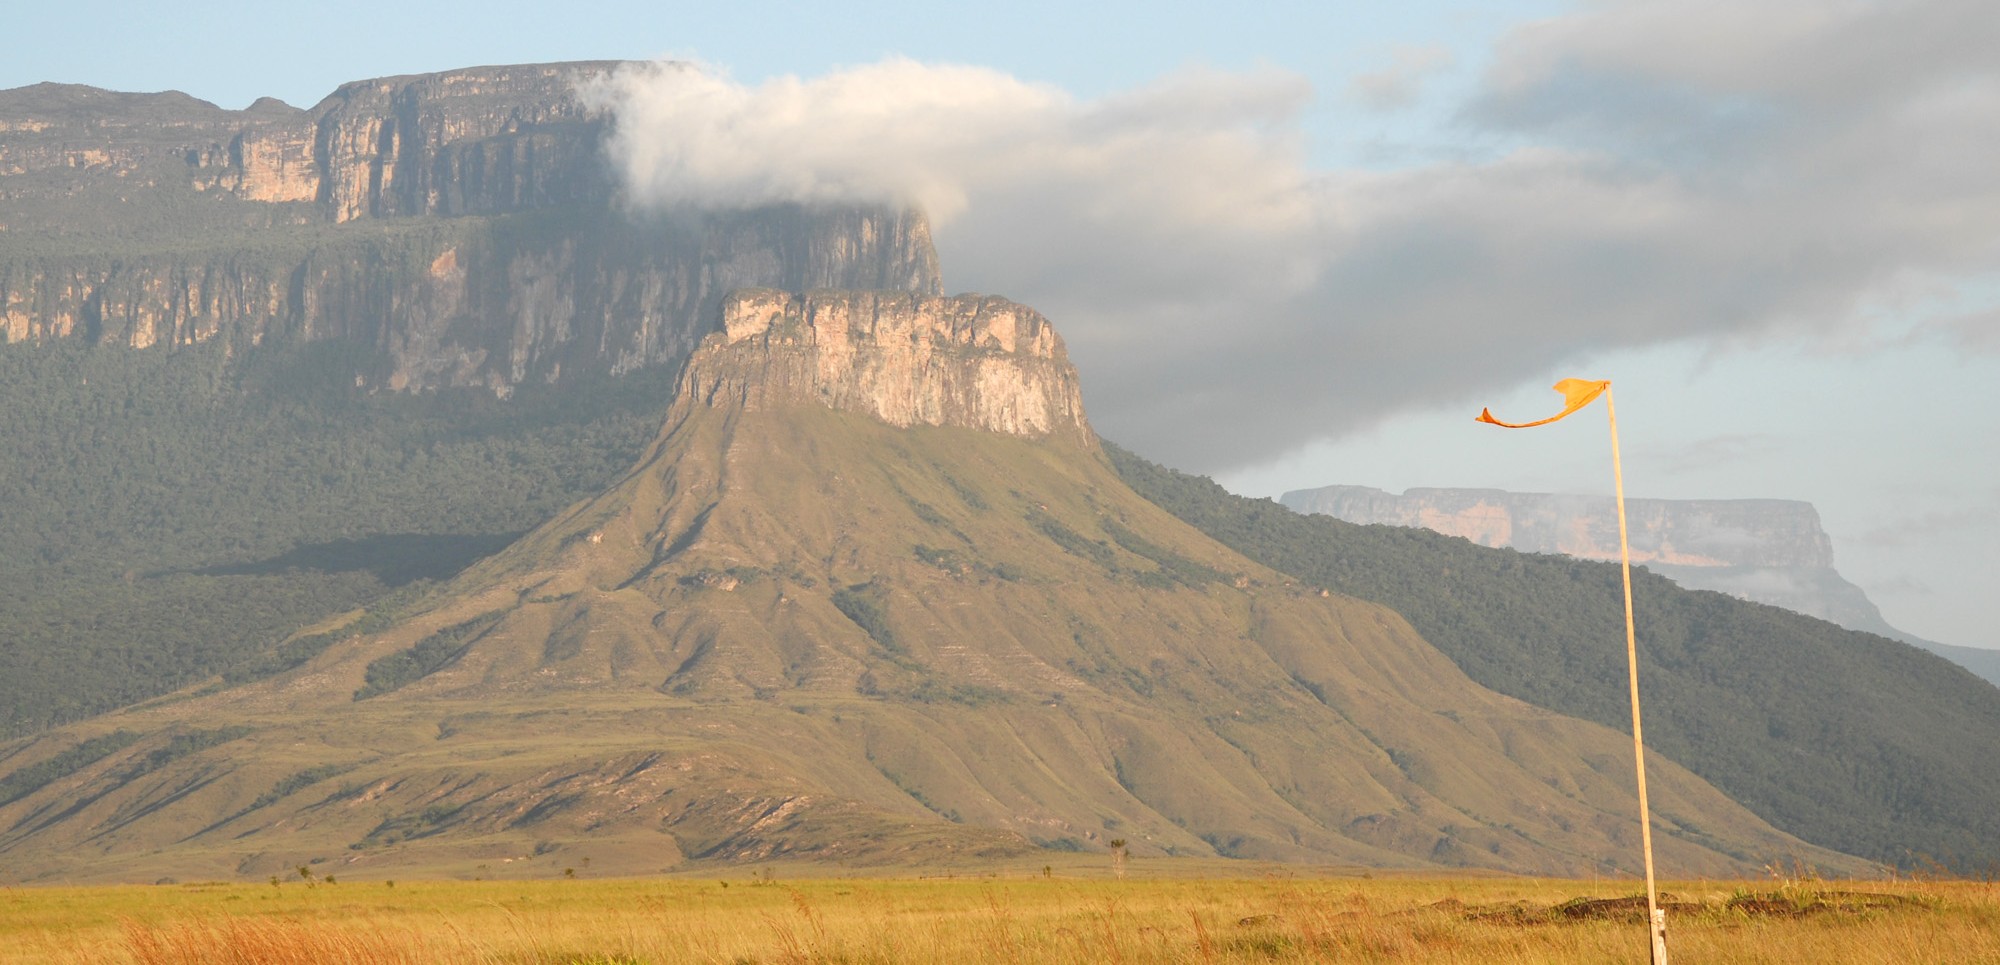 A Tepui as seen from the Indian village of Yunek in the Chimanta Massif